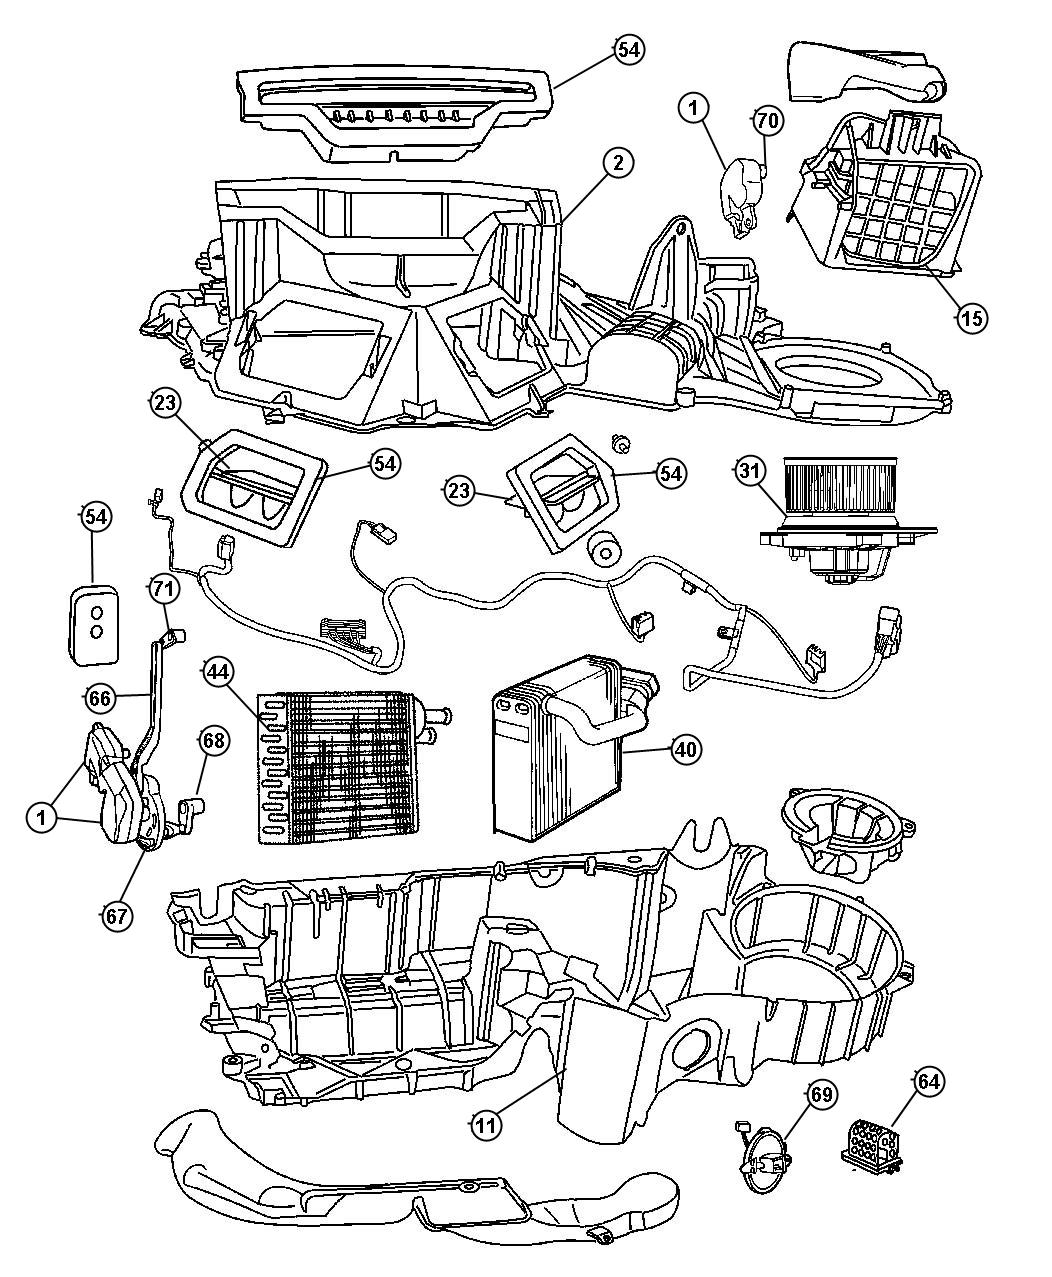 Heater and Air Conditioning Unit. Diagram